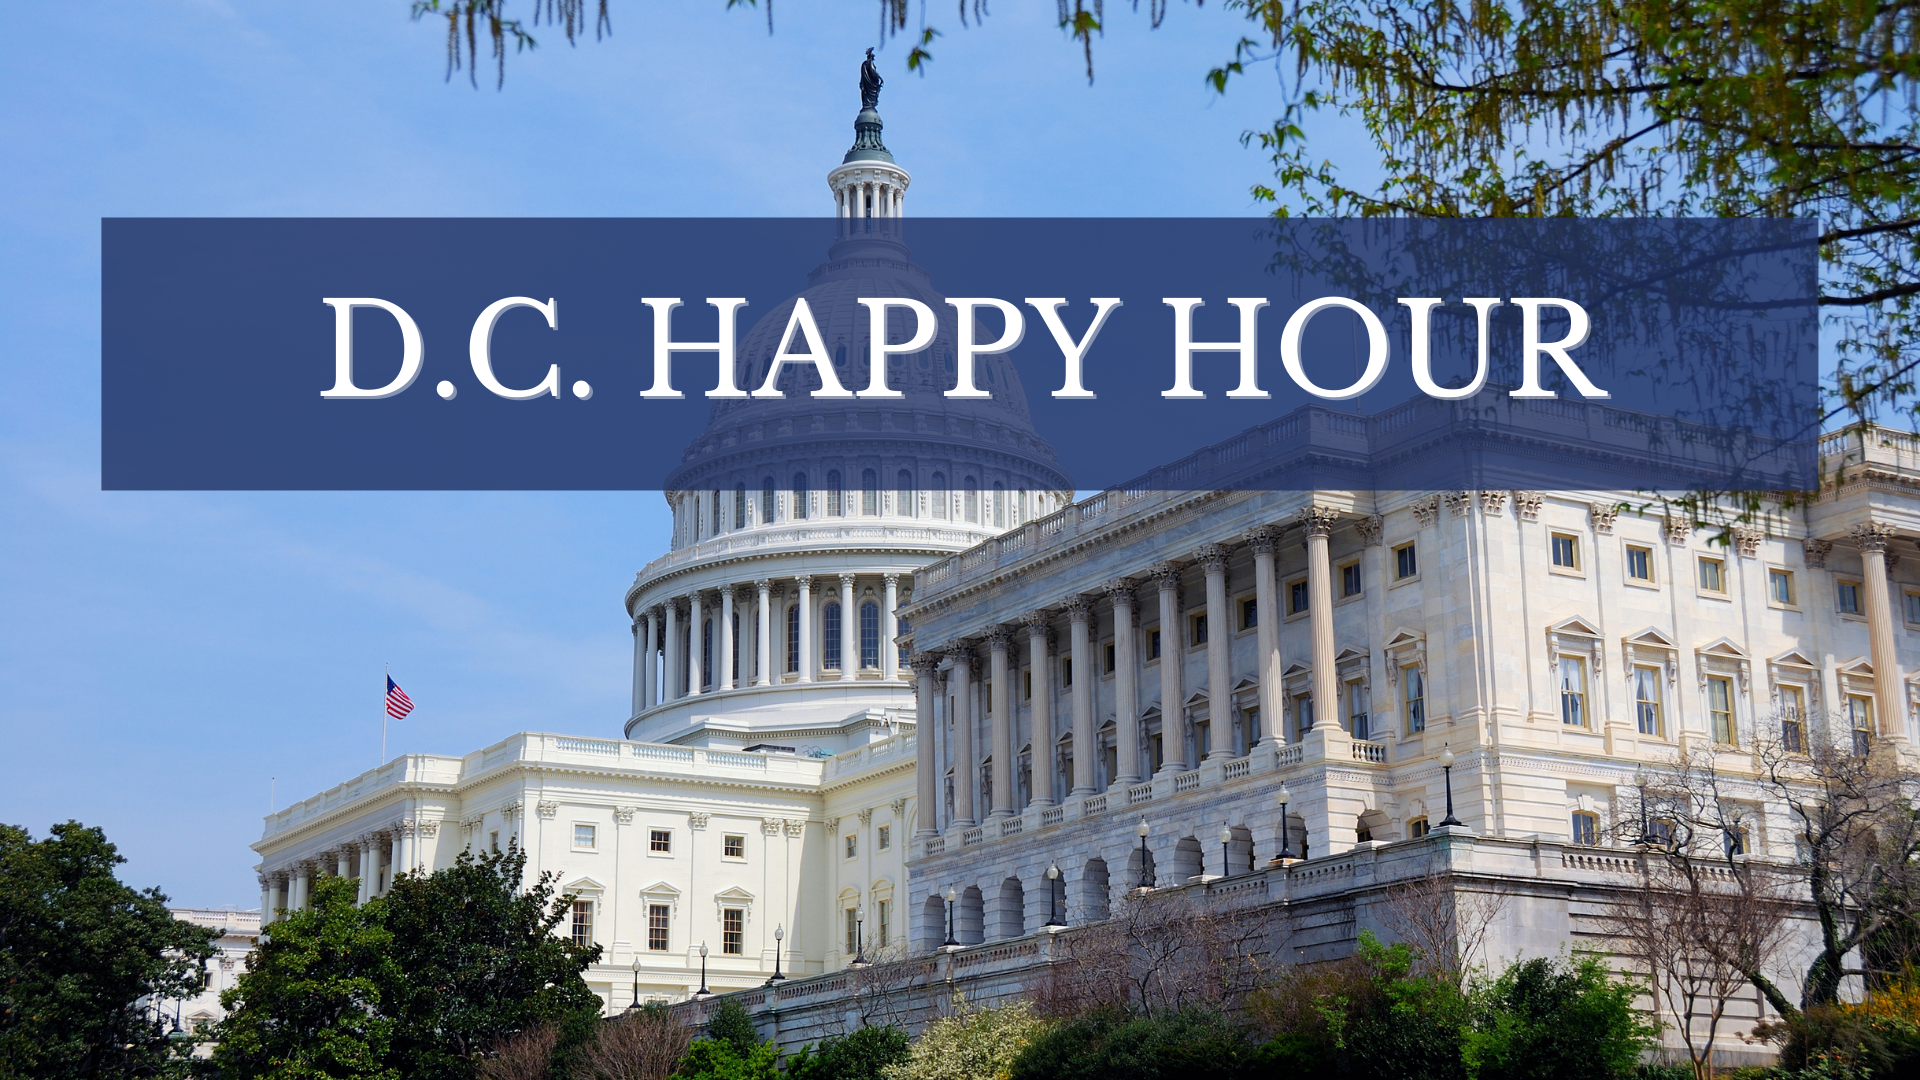 image for D.C. Happy Hour